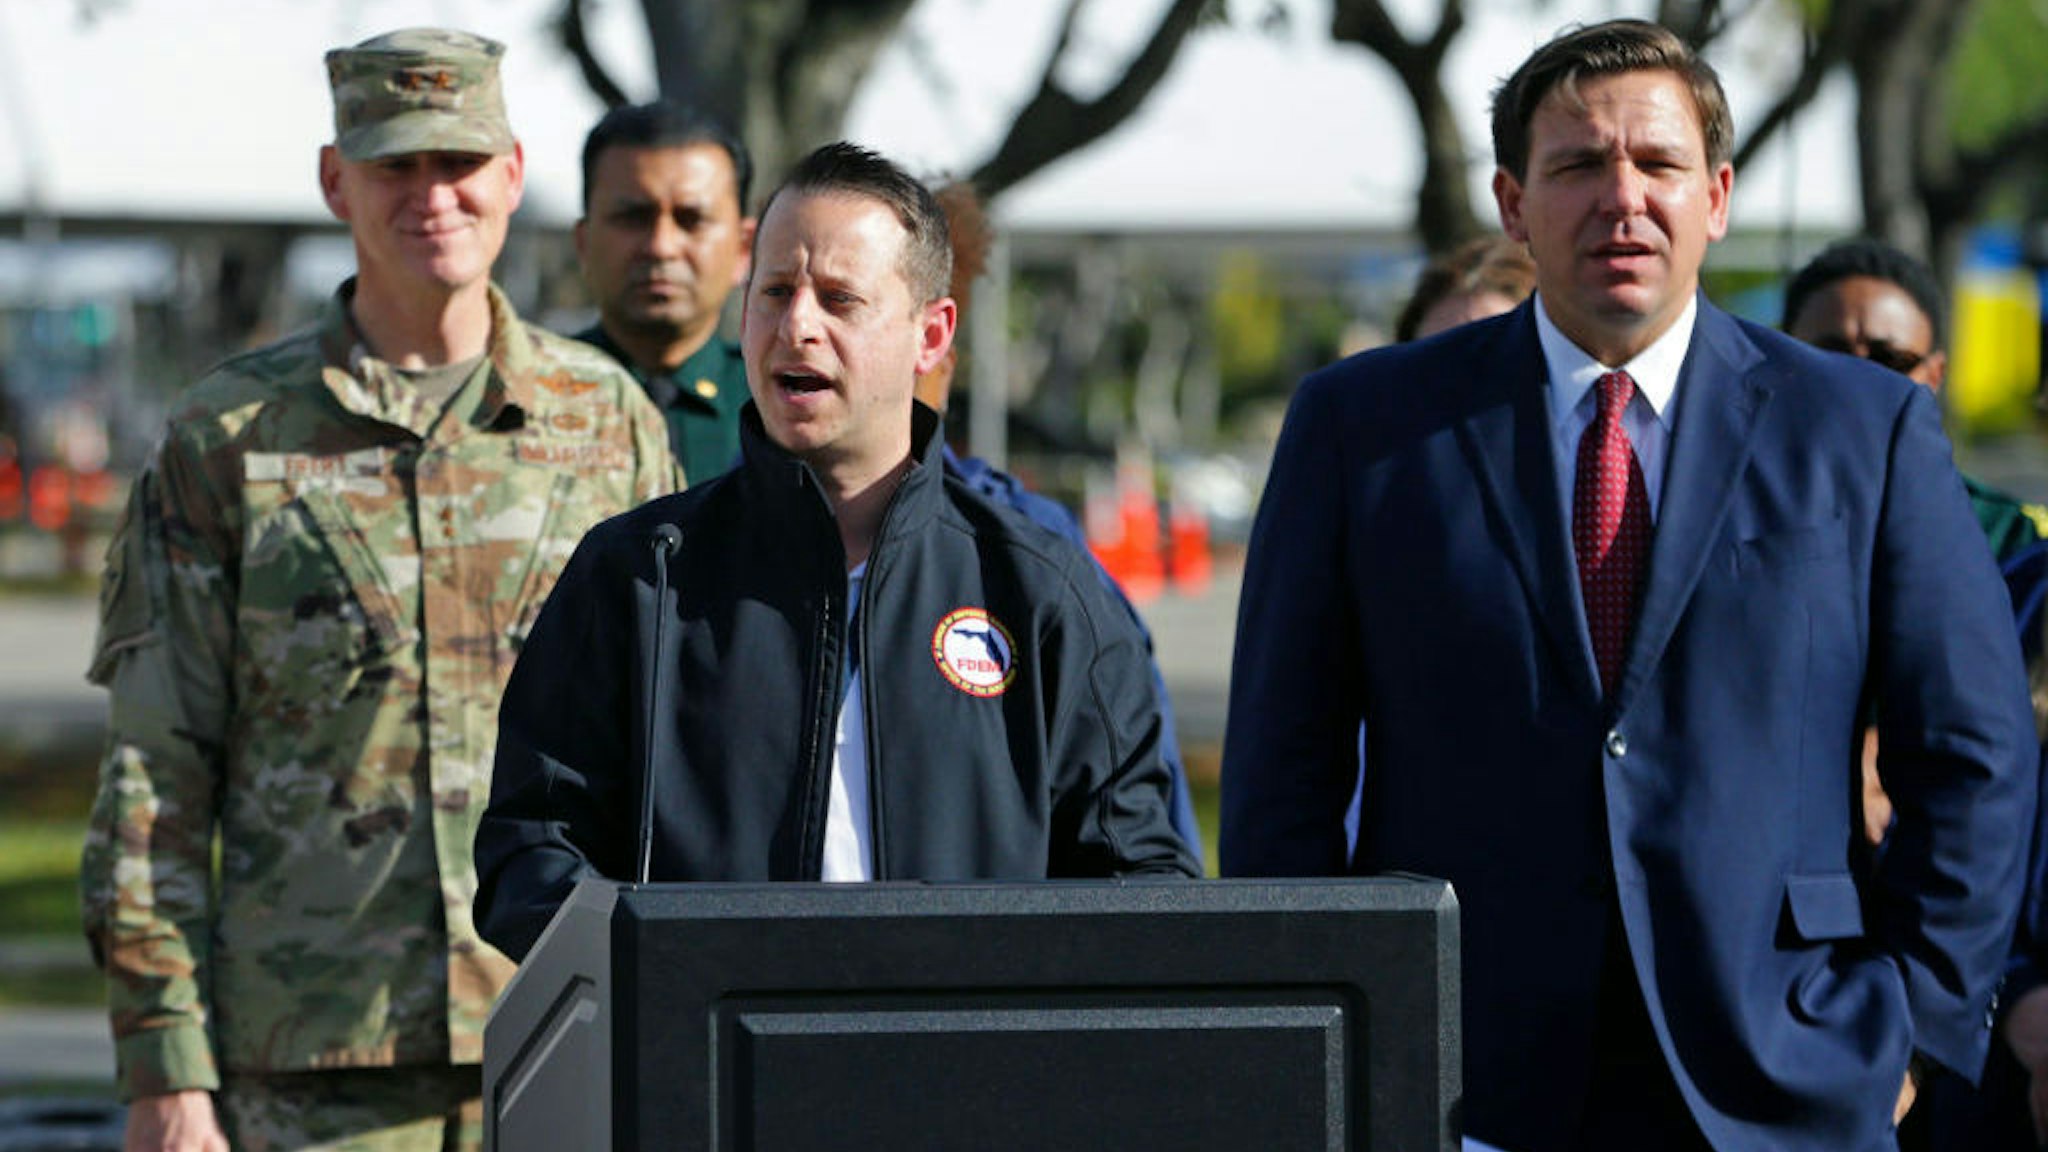 Director of Florida's Division of Emergency Management Jared Moskowitz alongside Florida Gov. Ron DeSantis talks to media during press conference at the Broward County mobile testing at CB Smith Park in Pembroke Pines on Thursday, March 19, 2020. (David Santiago/Miami Herald/TNS)